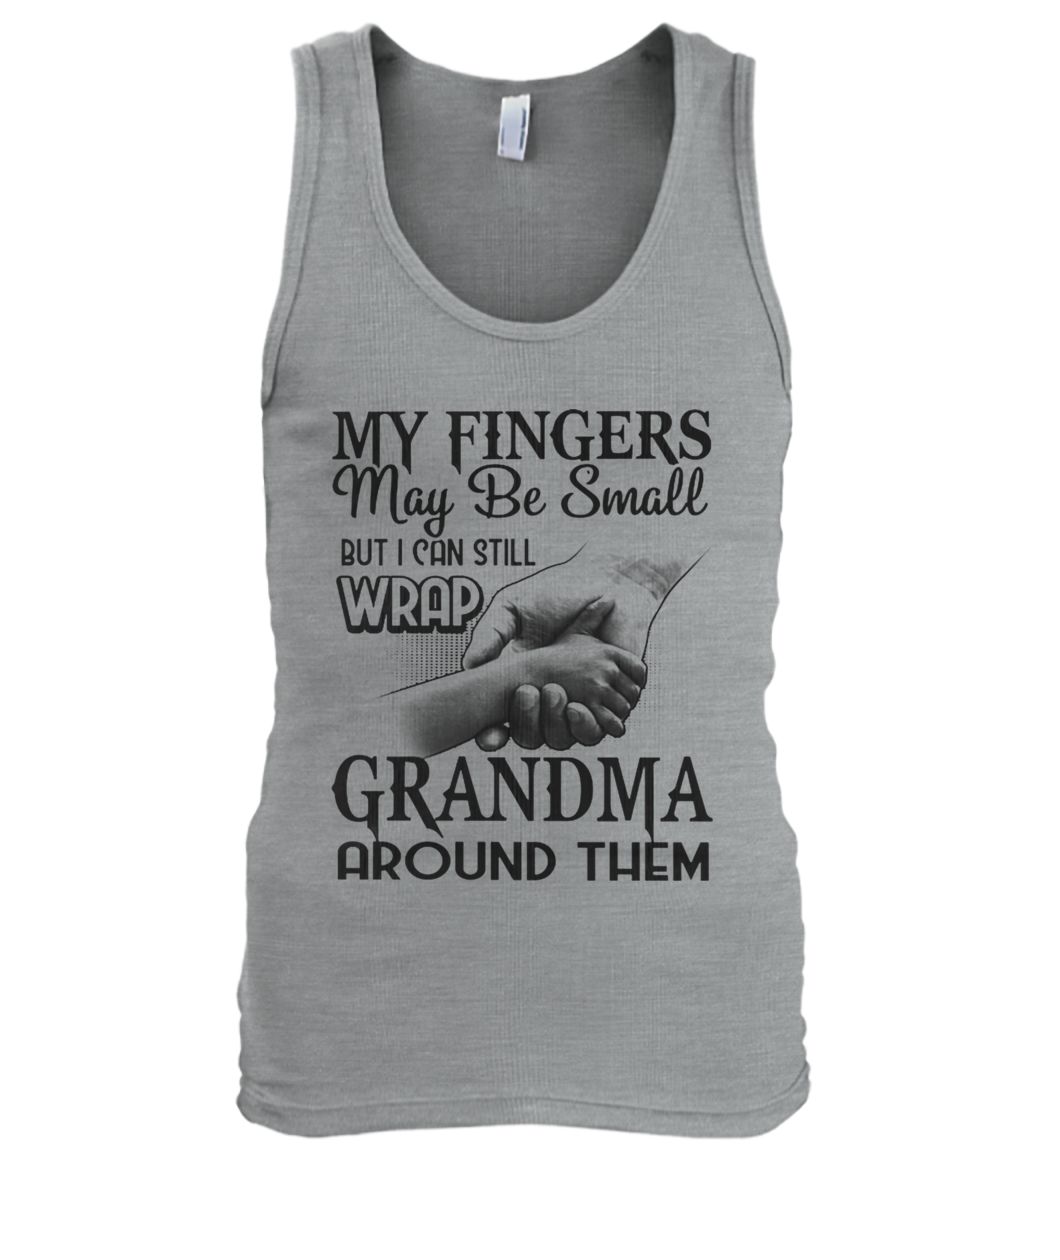 My fingers may be small but I can still wrap grandma around them men's tank top